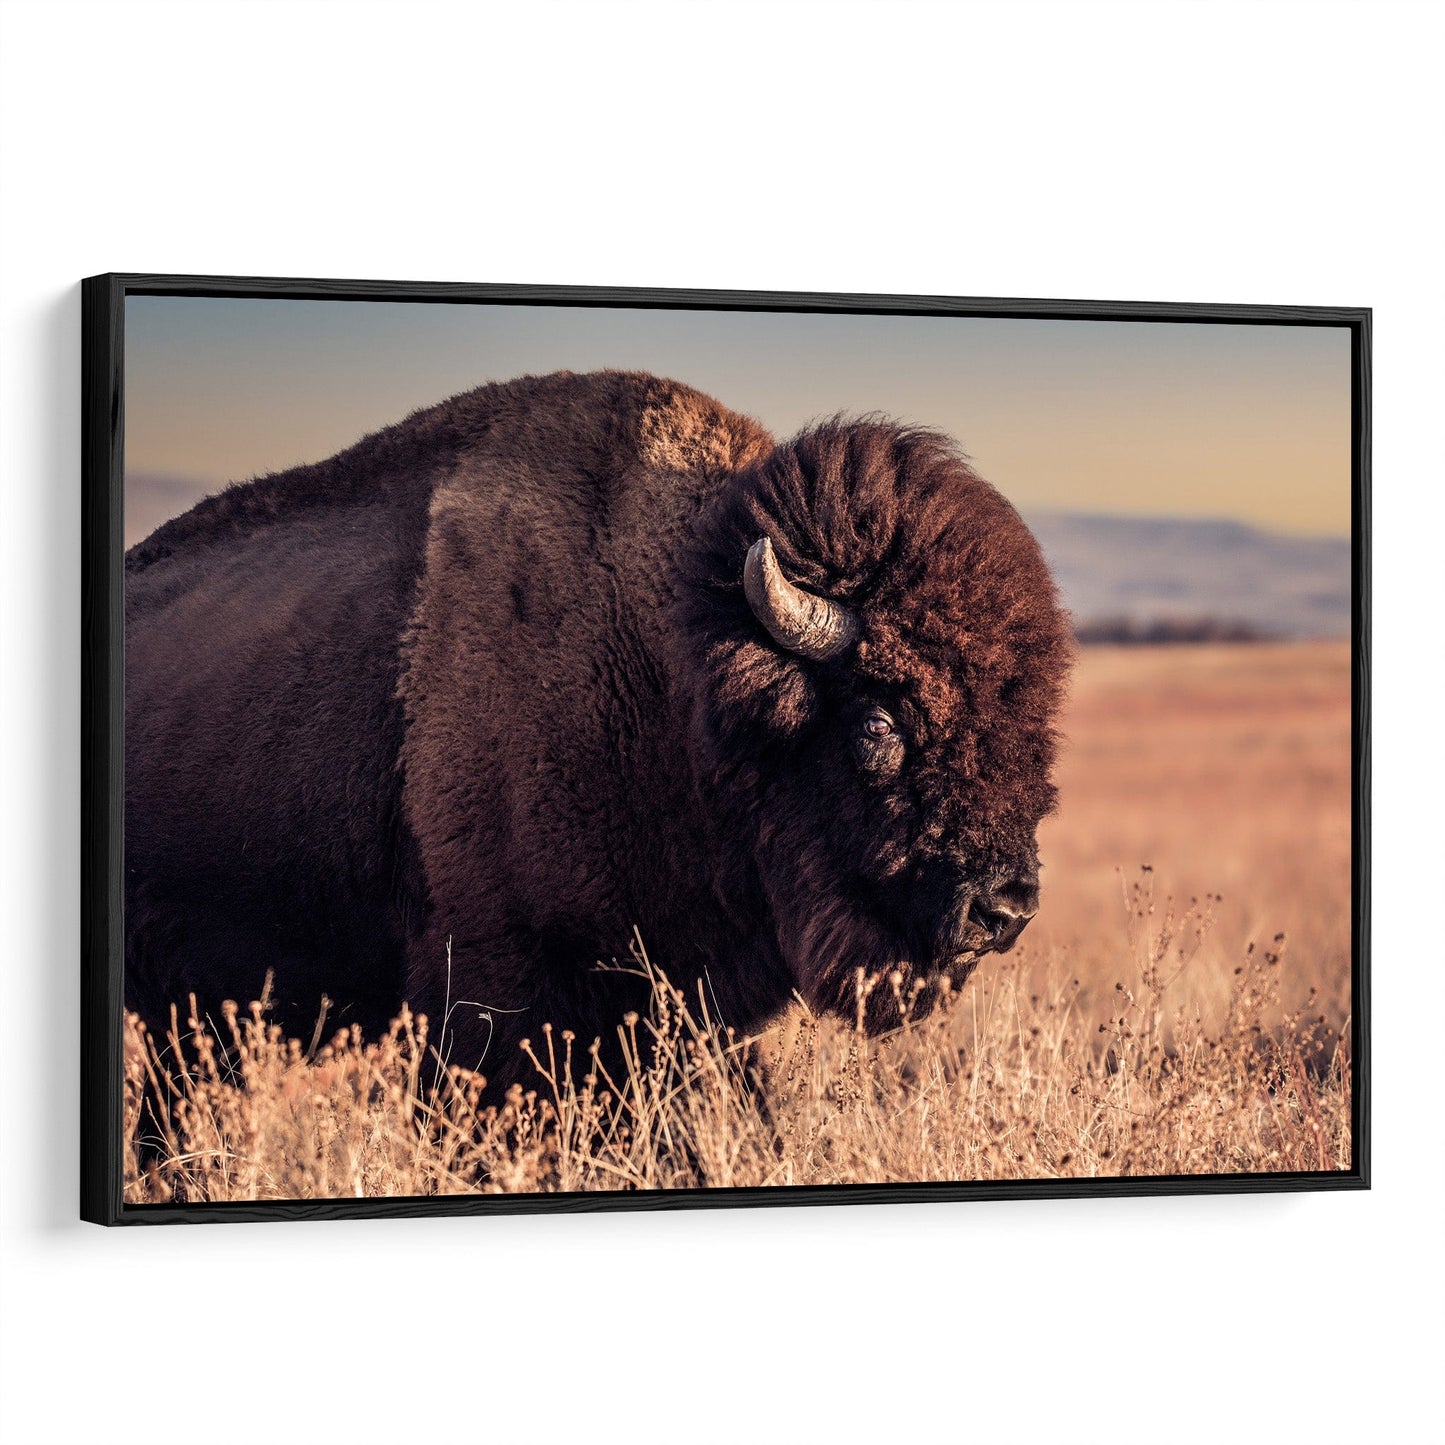 Bison Bull Canvas Print - Wichita Mountains Wildlife Refuge Canvas-Black Frame / 12 x 18 Inches Wall Art Teri James Photography